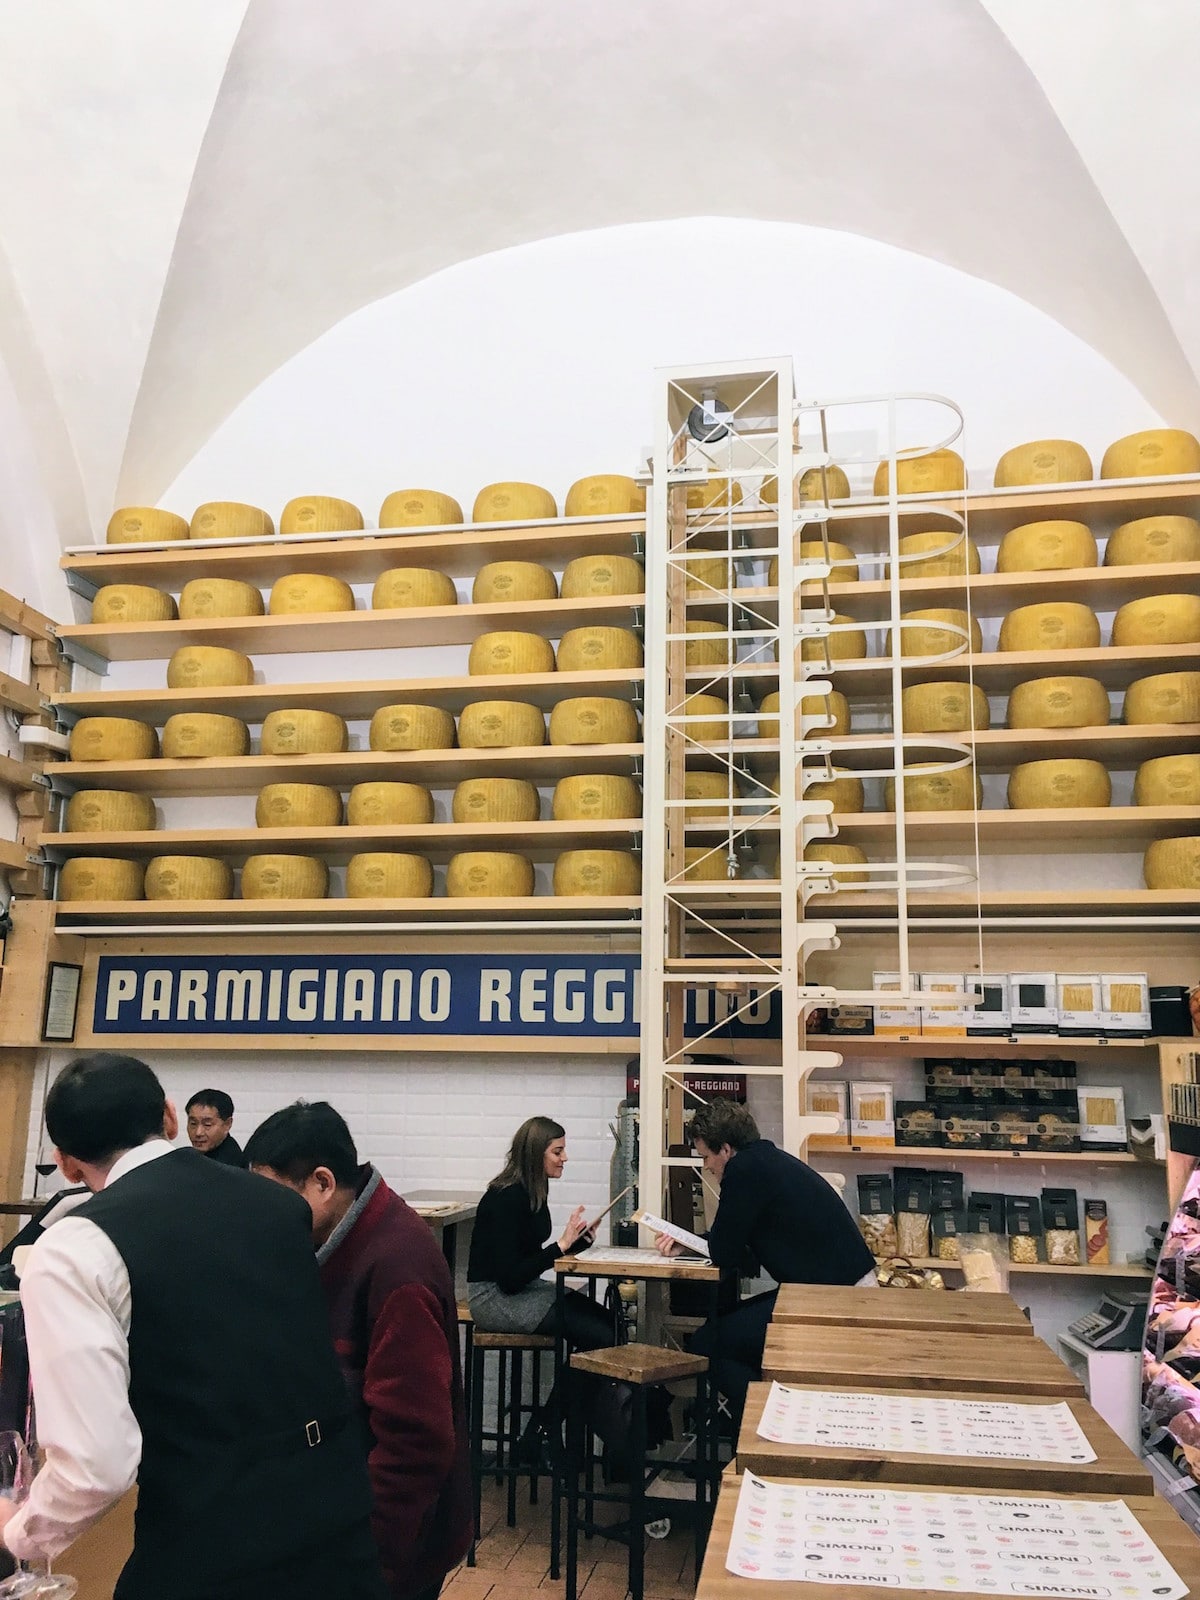 A Weekend Getaway to Bologna